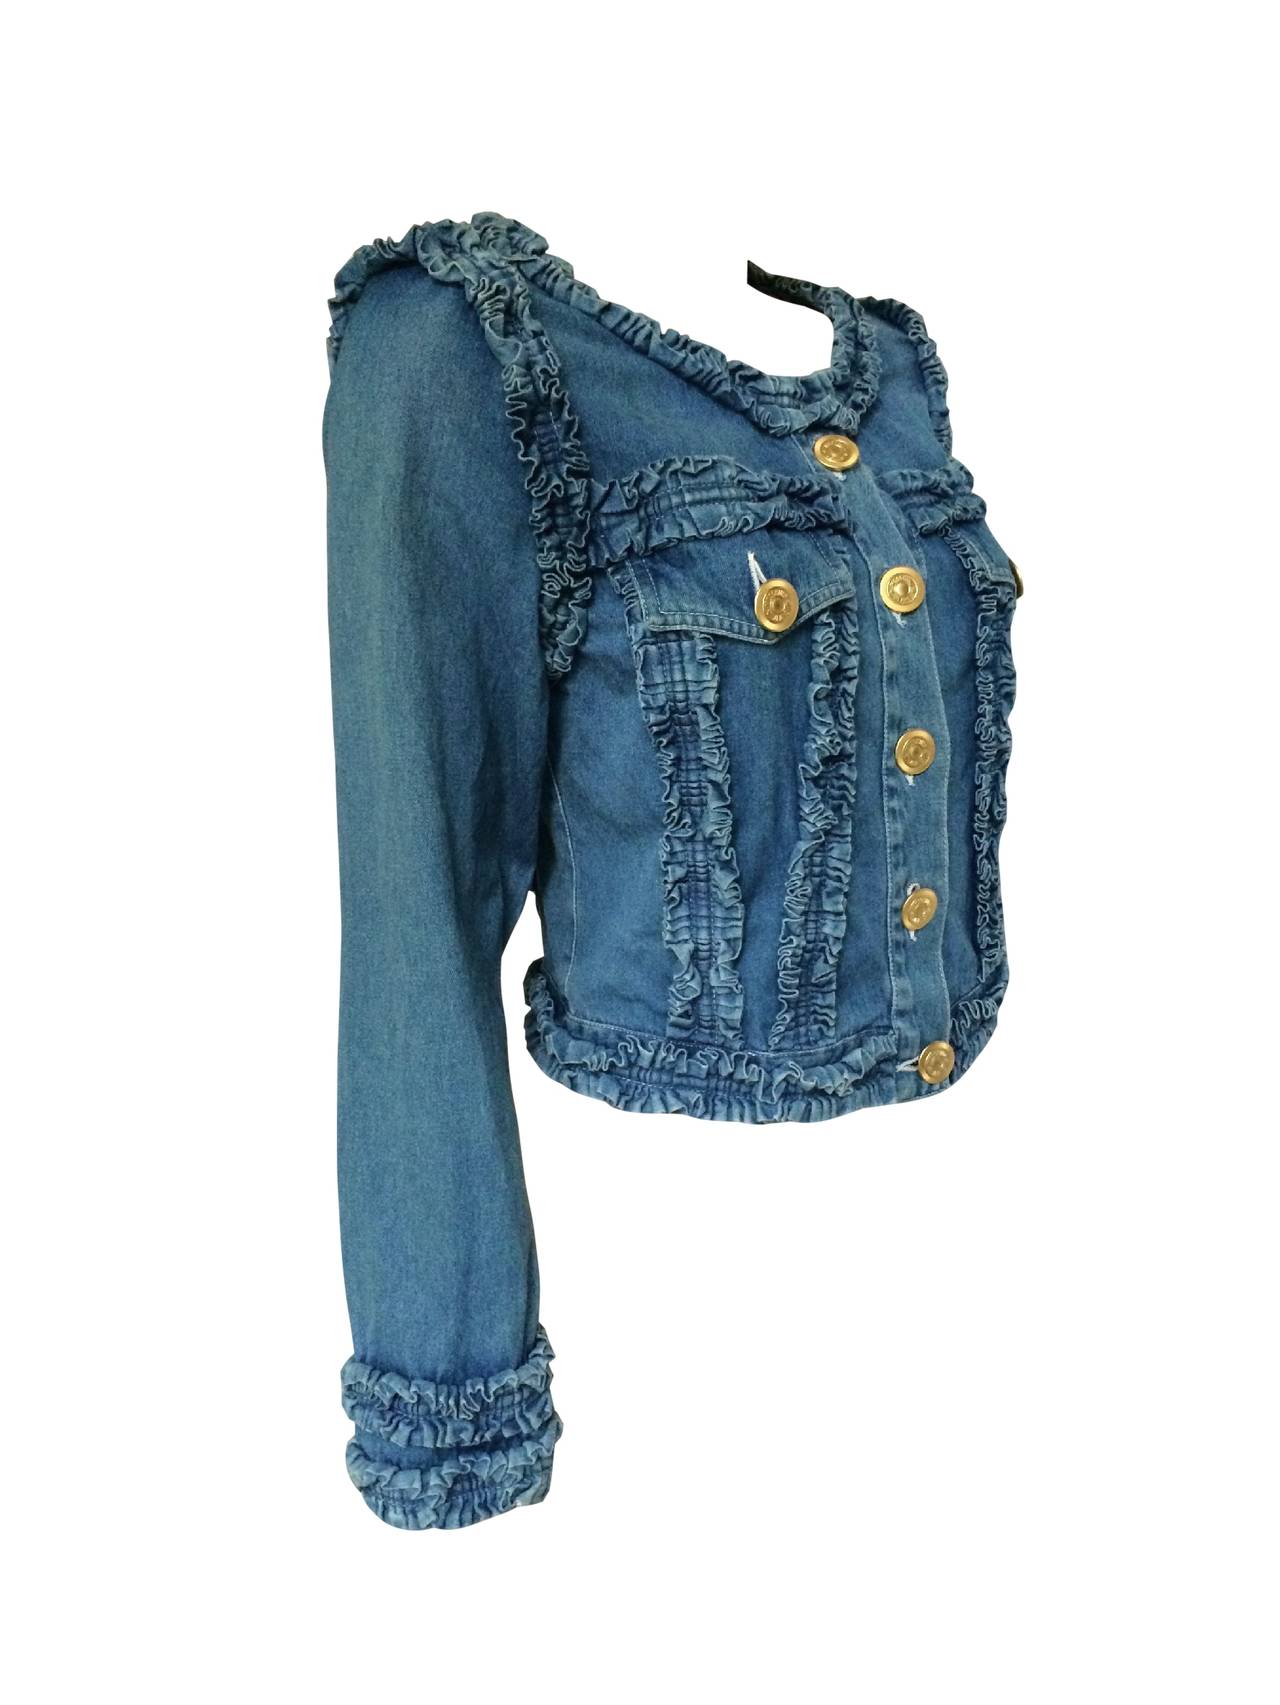 Mid to late 90’s cute vintage ruffled jeans short jacket by Moschino. “Bon Jeans bon Genre” typical of Moschino’s, twisting the codes by playing with the famous French words “Bon chic, bon genre”. Gilt gold buttons “Moschino Jeans”. Labeled size IT